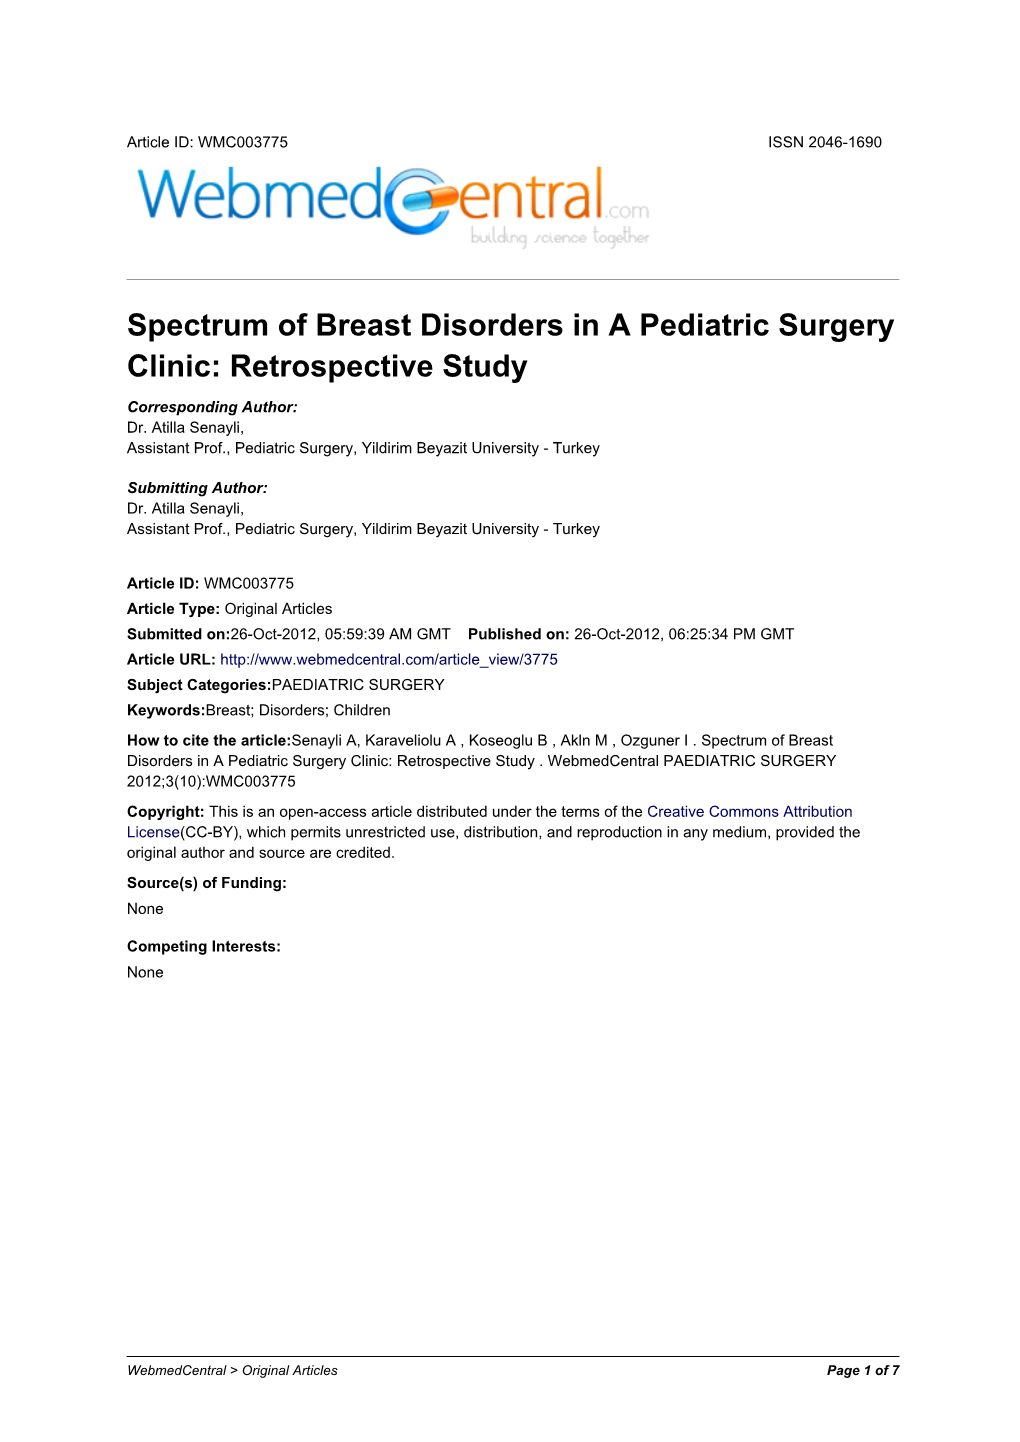 Spectrum of Breast Disorders in a Pediatric Surgery Clinic: Retrospective Study